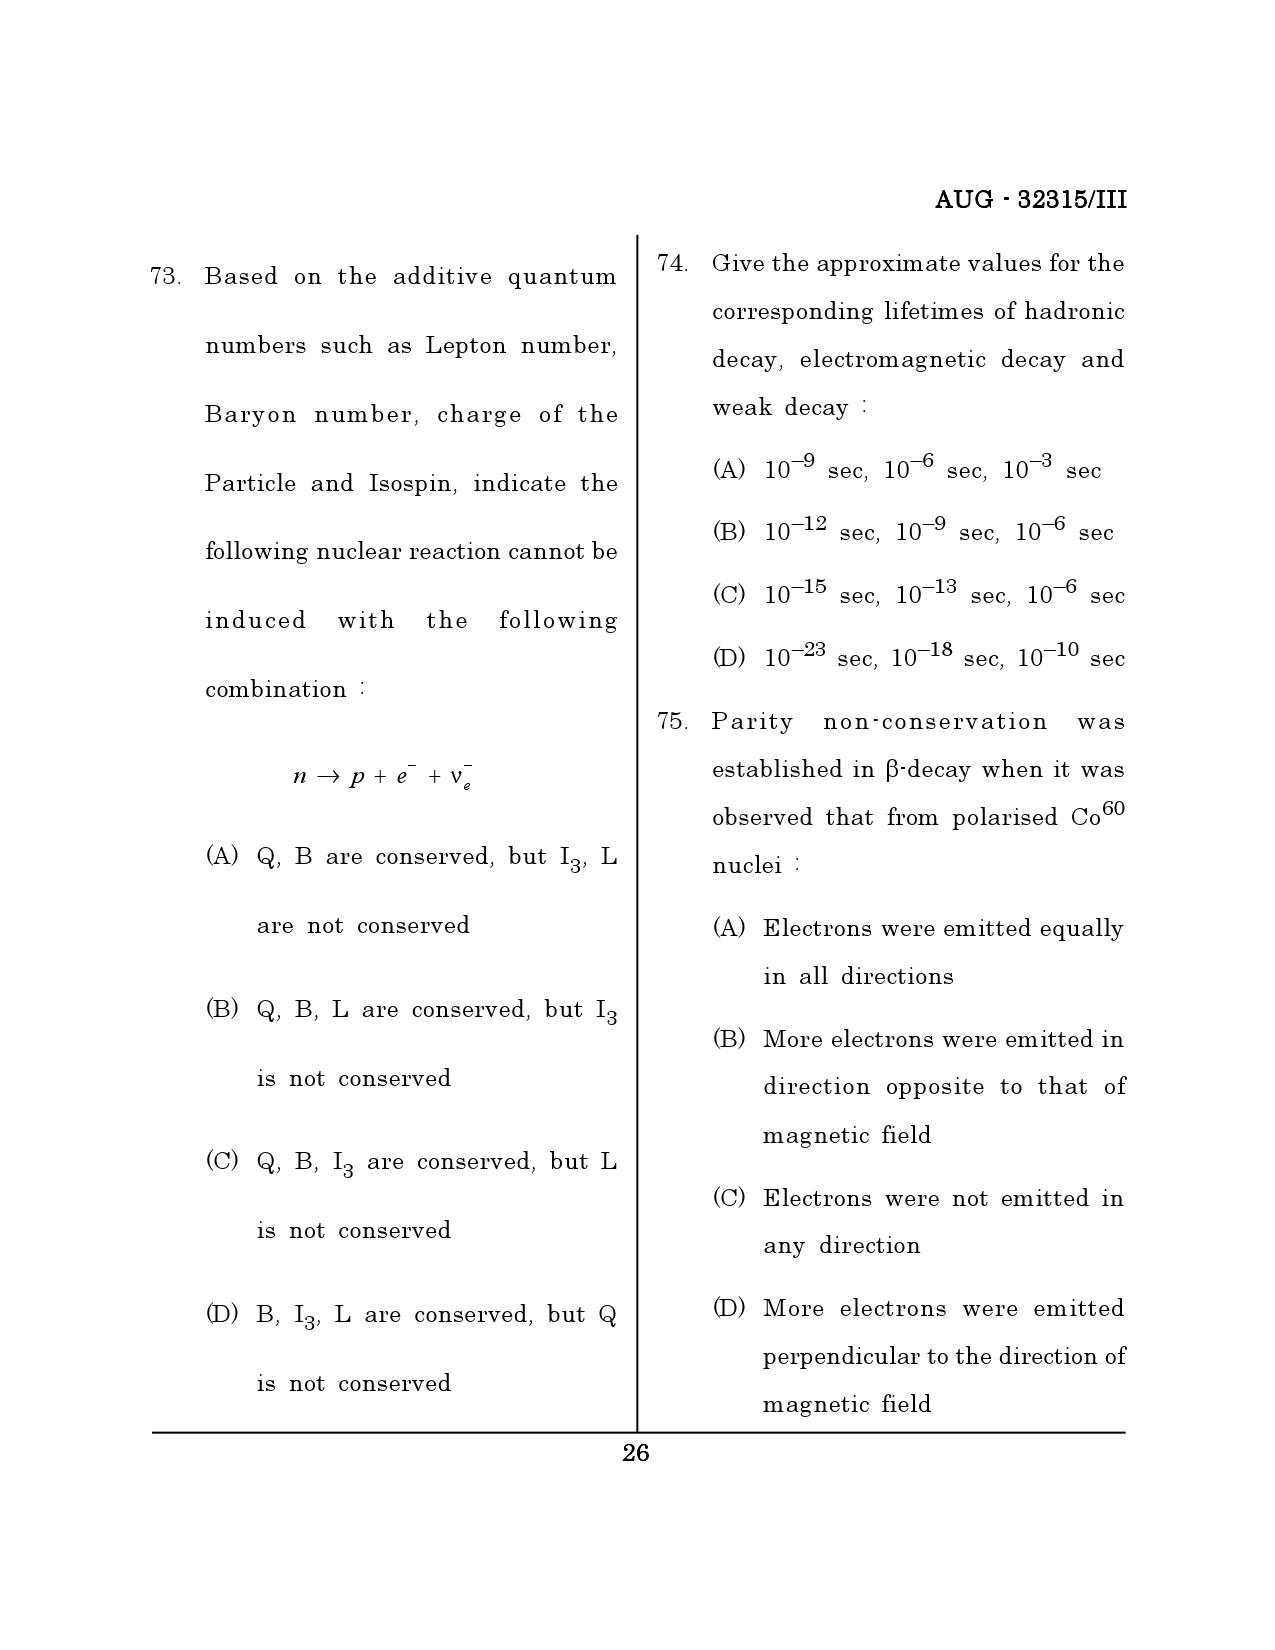 Maharashtra SET Physical Science Question Paper III August 2015 25